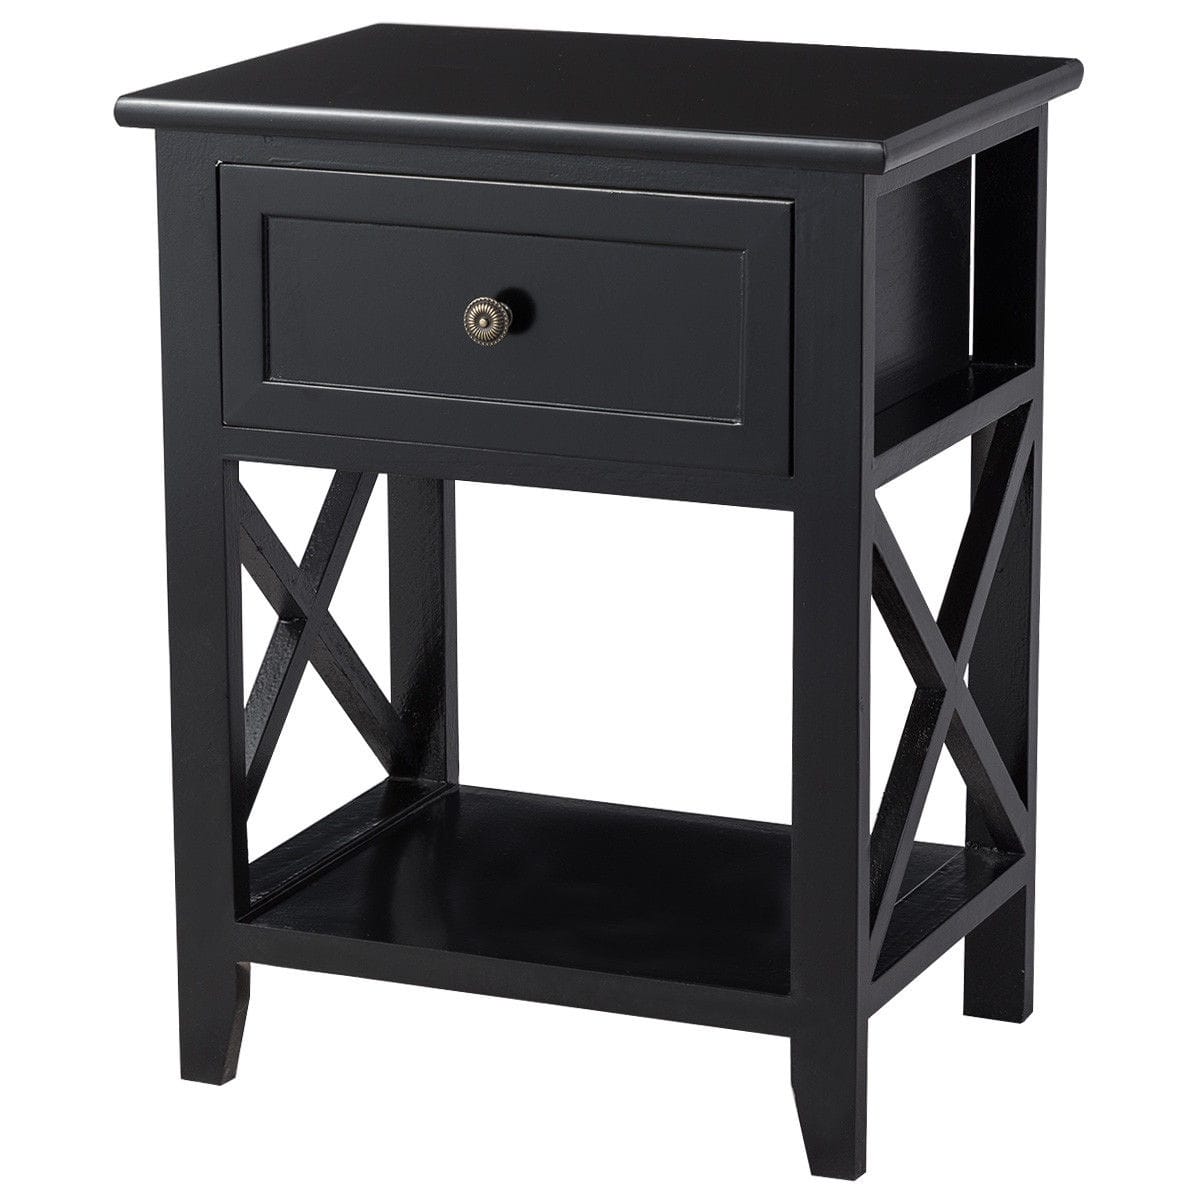 black bedside tables with drawers way end table nightstand drawer storage room decor bottom shelf timmy accent circle nesting coffee cocktail round wicker teal lamp west elm